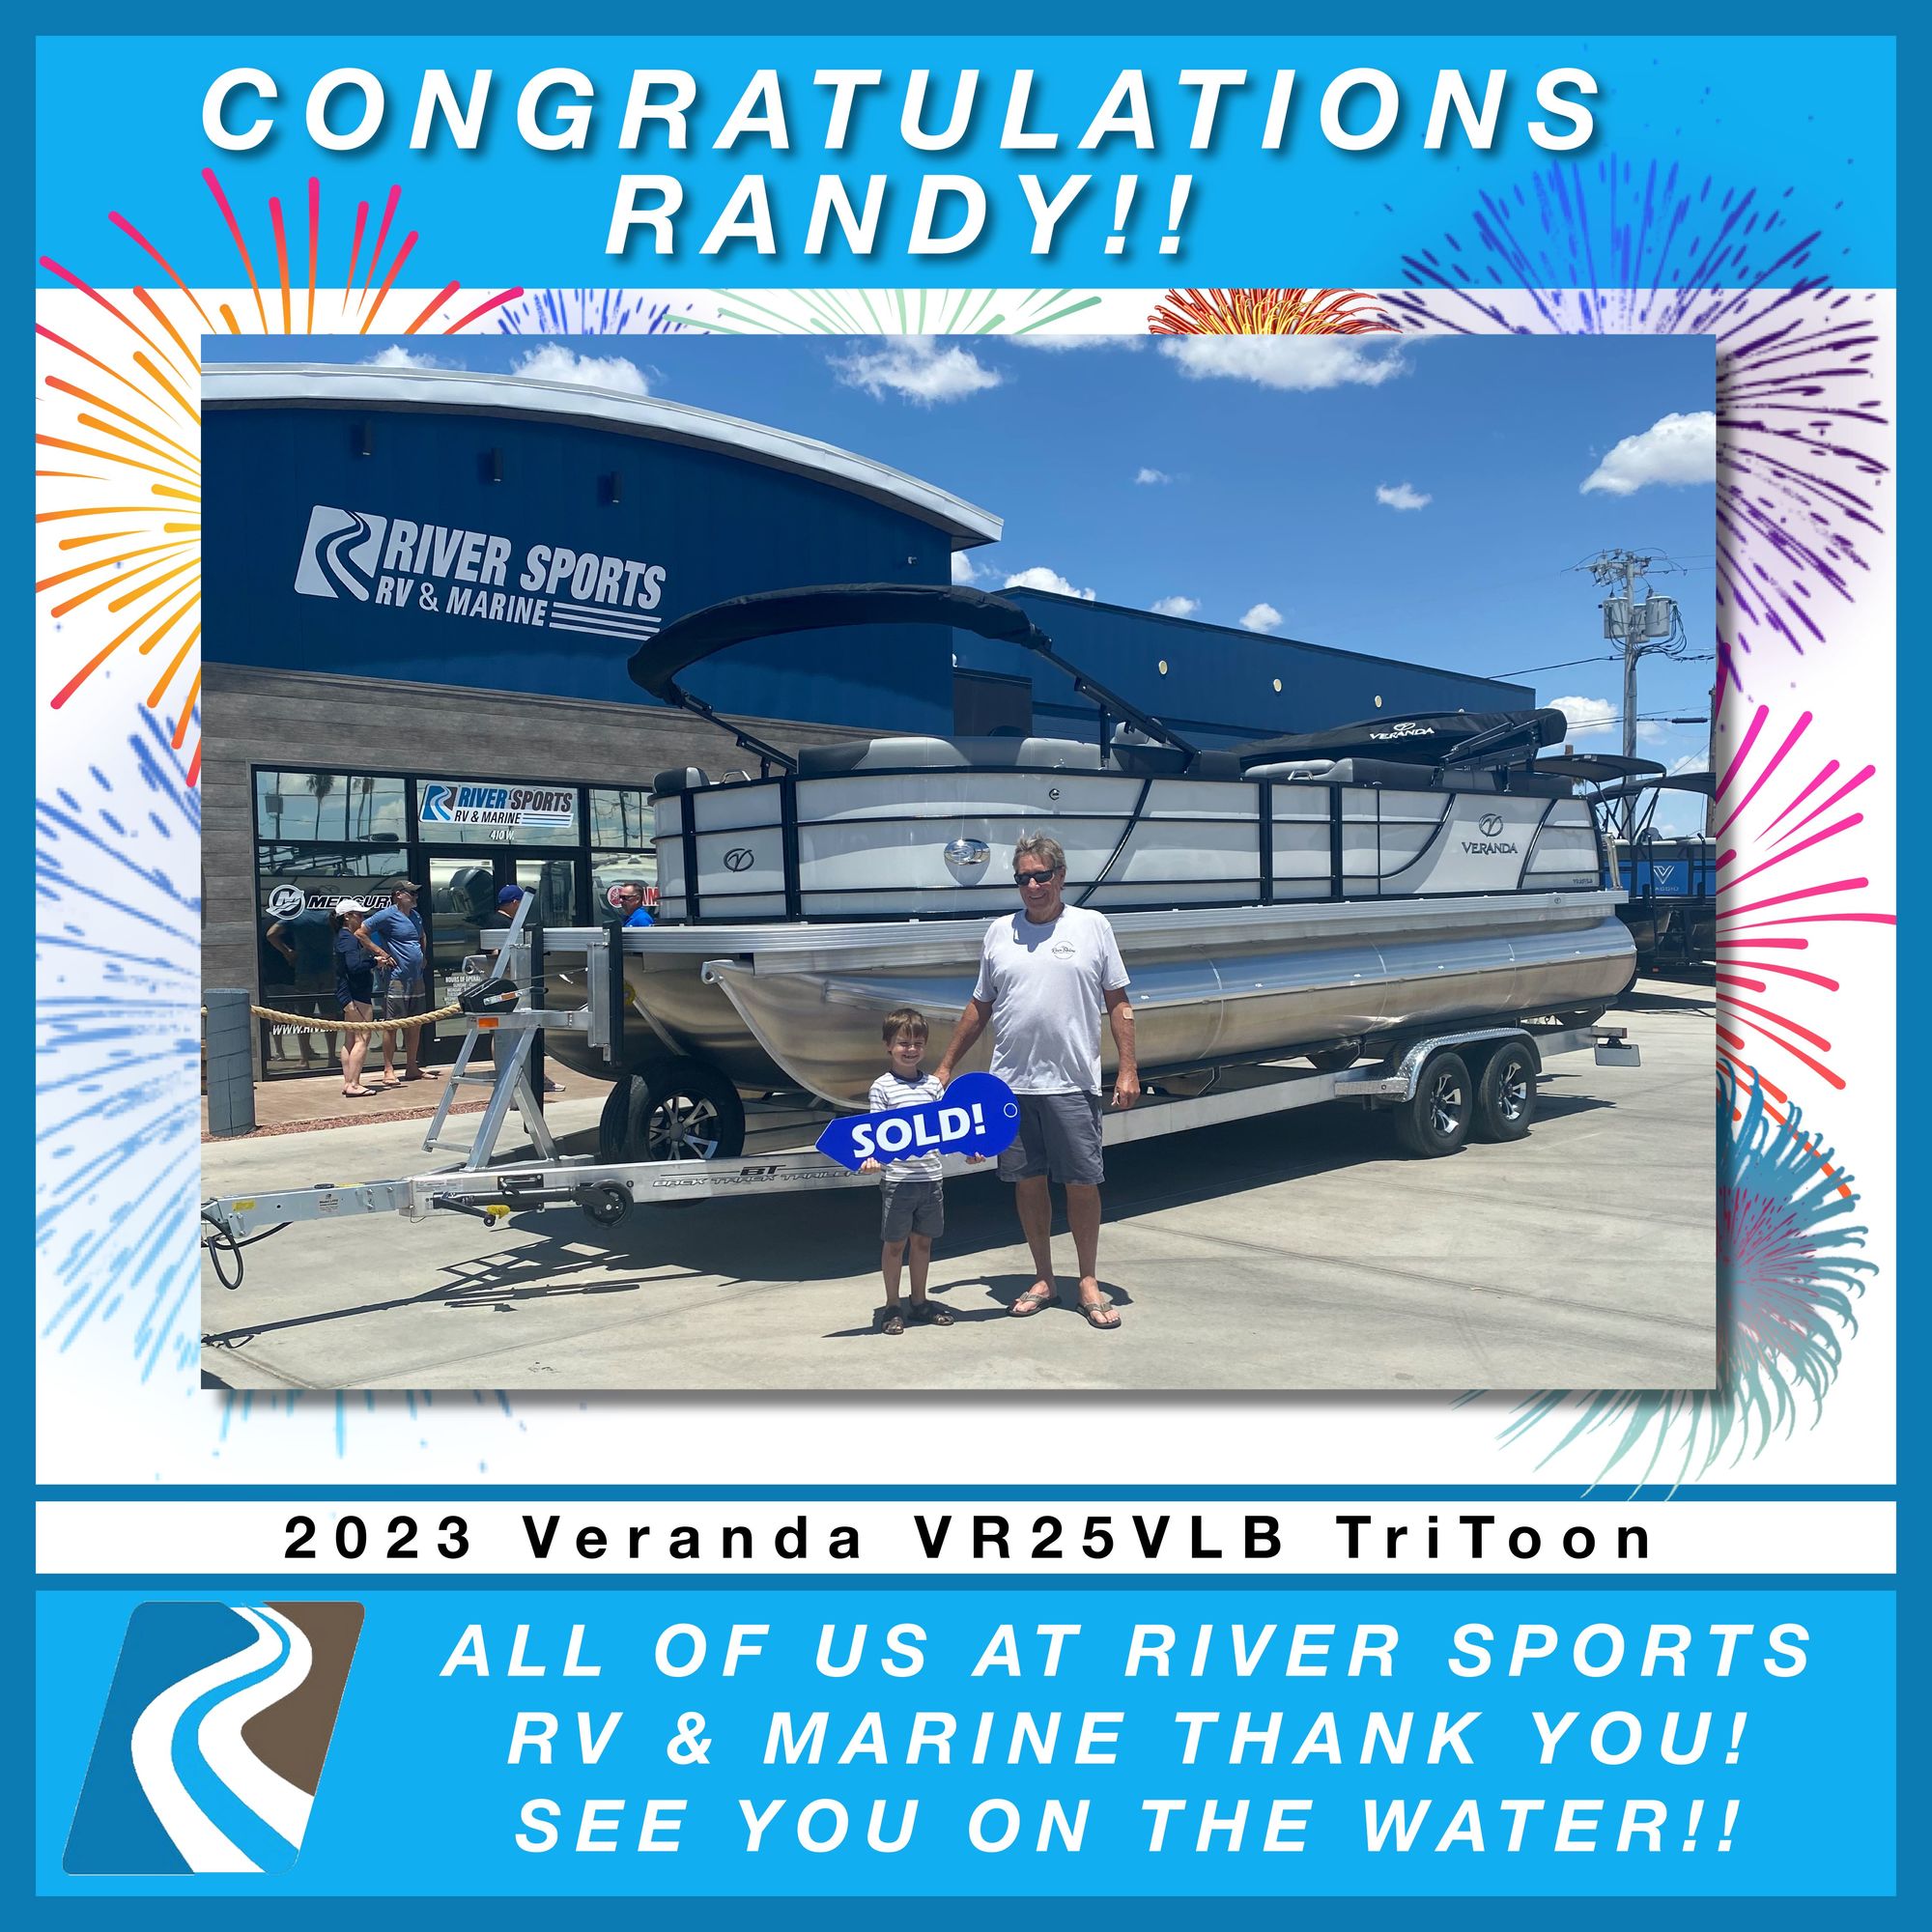 Randy and his new 2023 Veranda VR25VLB TriToon from River Sports RV and Marine